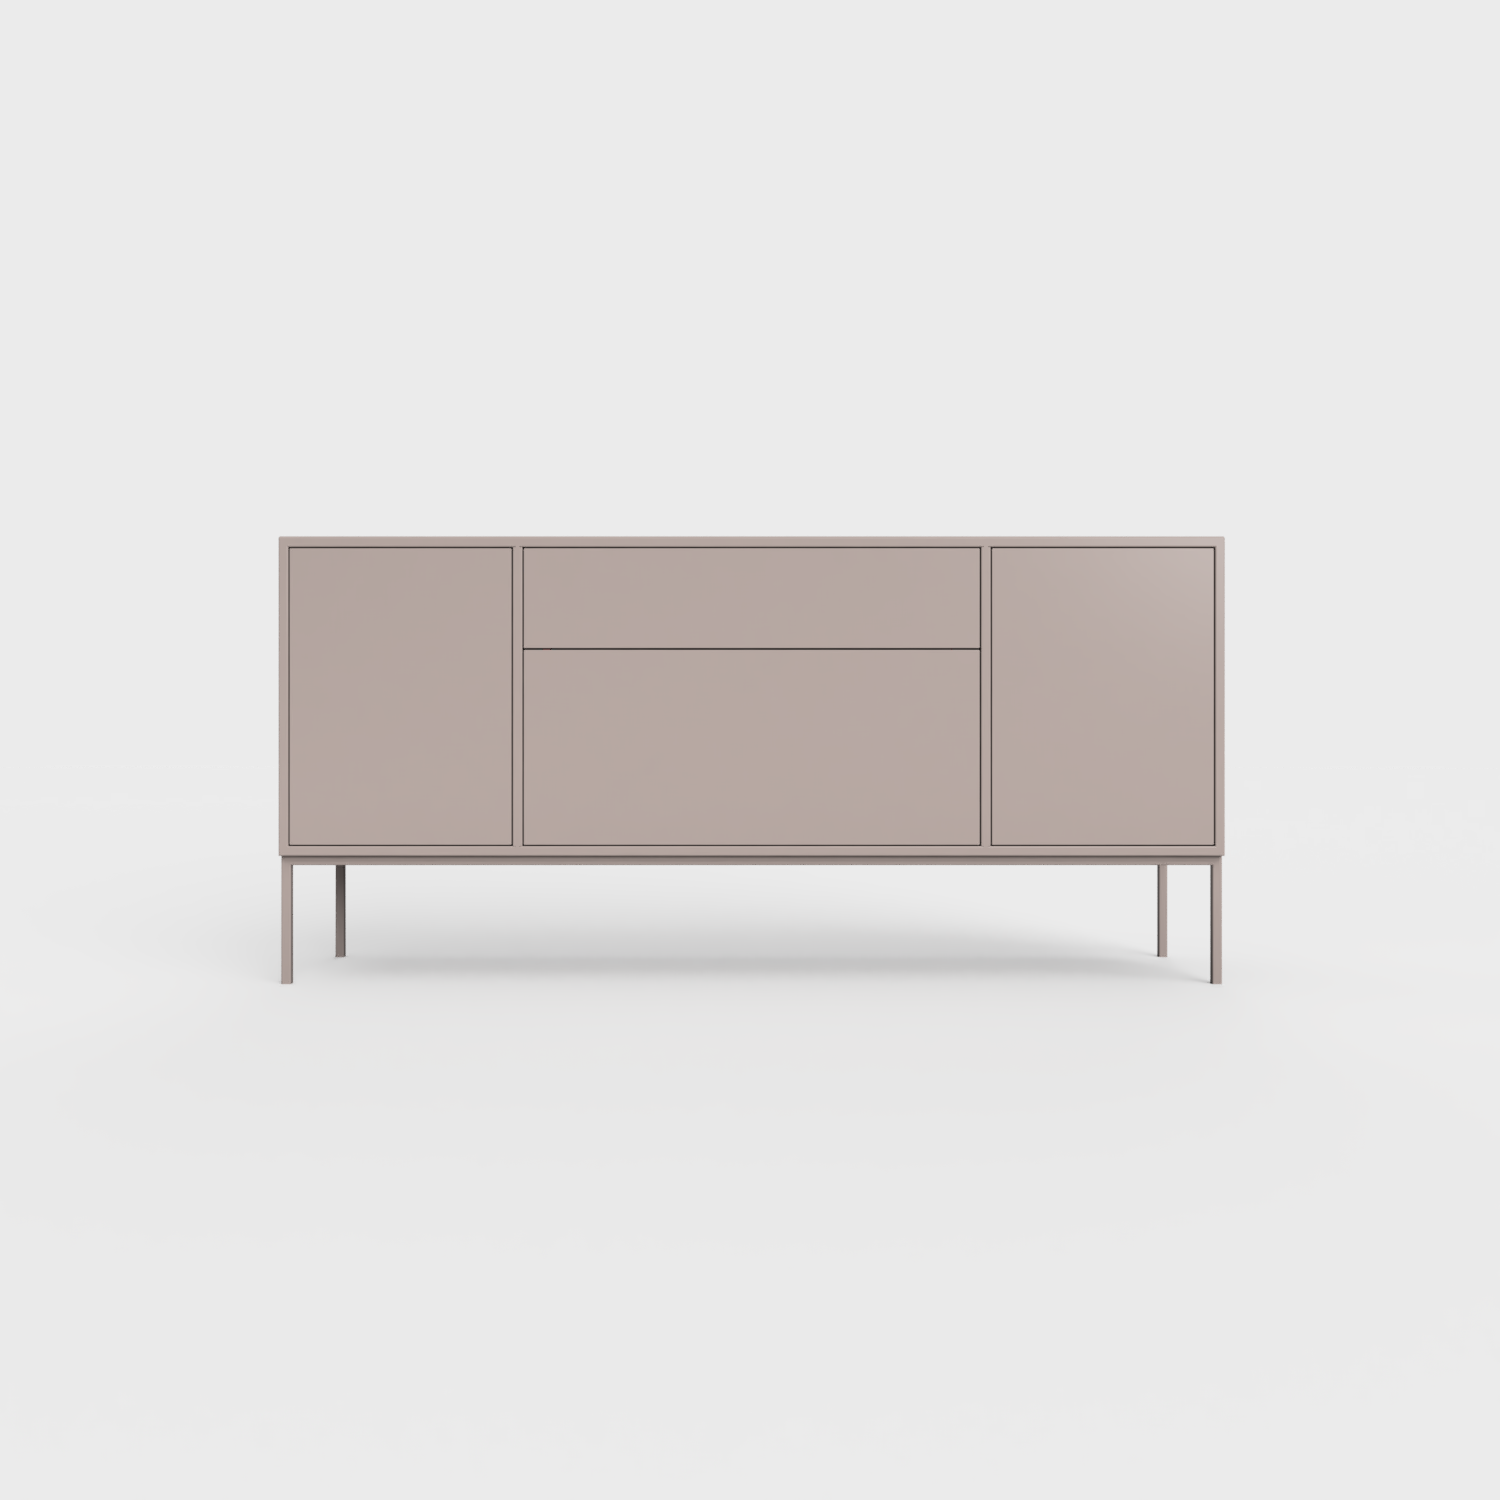 Arnika 02 Sideboard in Cold Beige color, powder-coated steel, elegant and modern piece of furniture for your living room